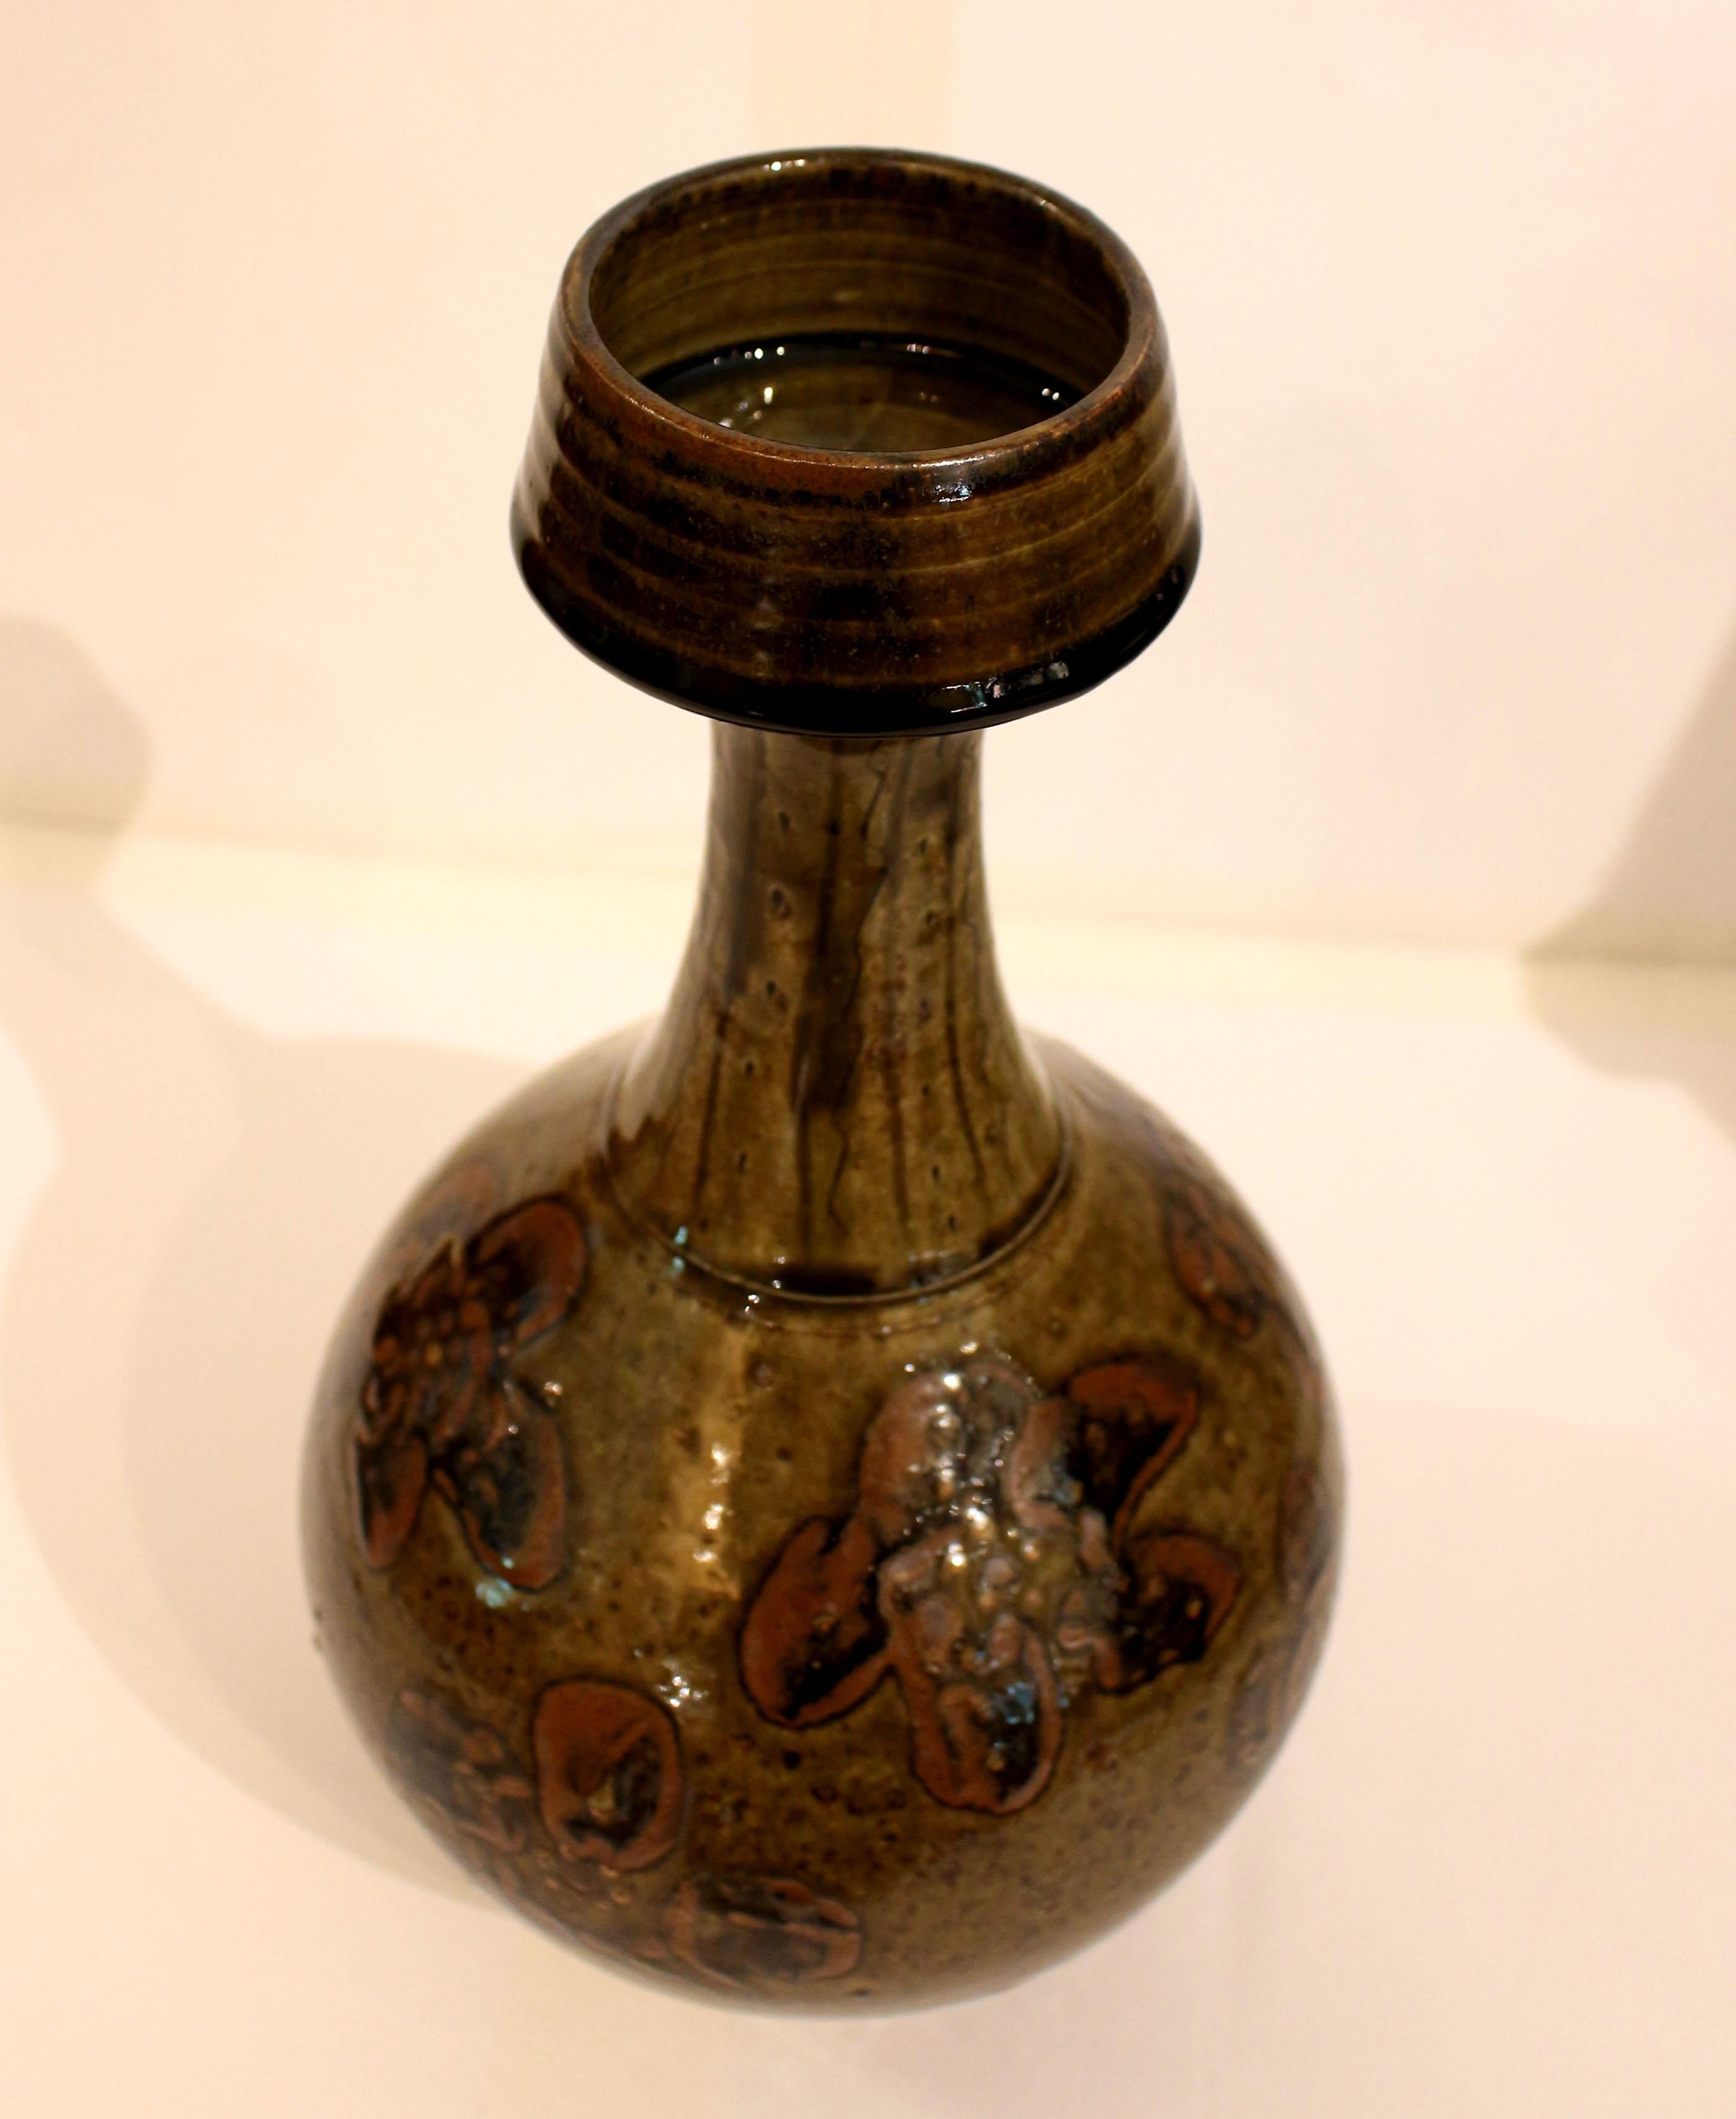 Post-1995 long neck pottery vase by Mark Hewitt. An exceptionally fine example with floral motif. Post-1995 stamp plus 